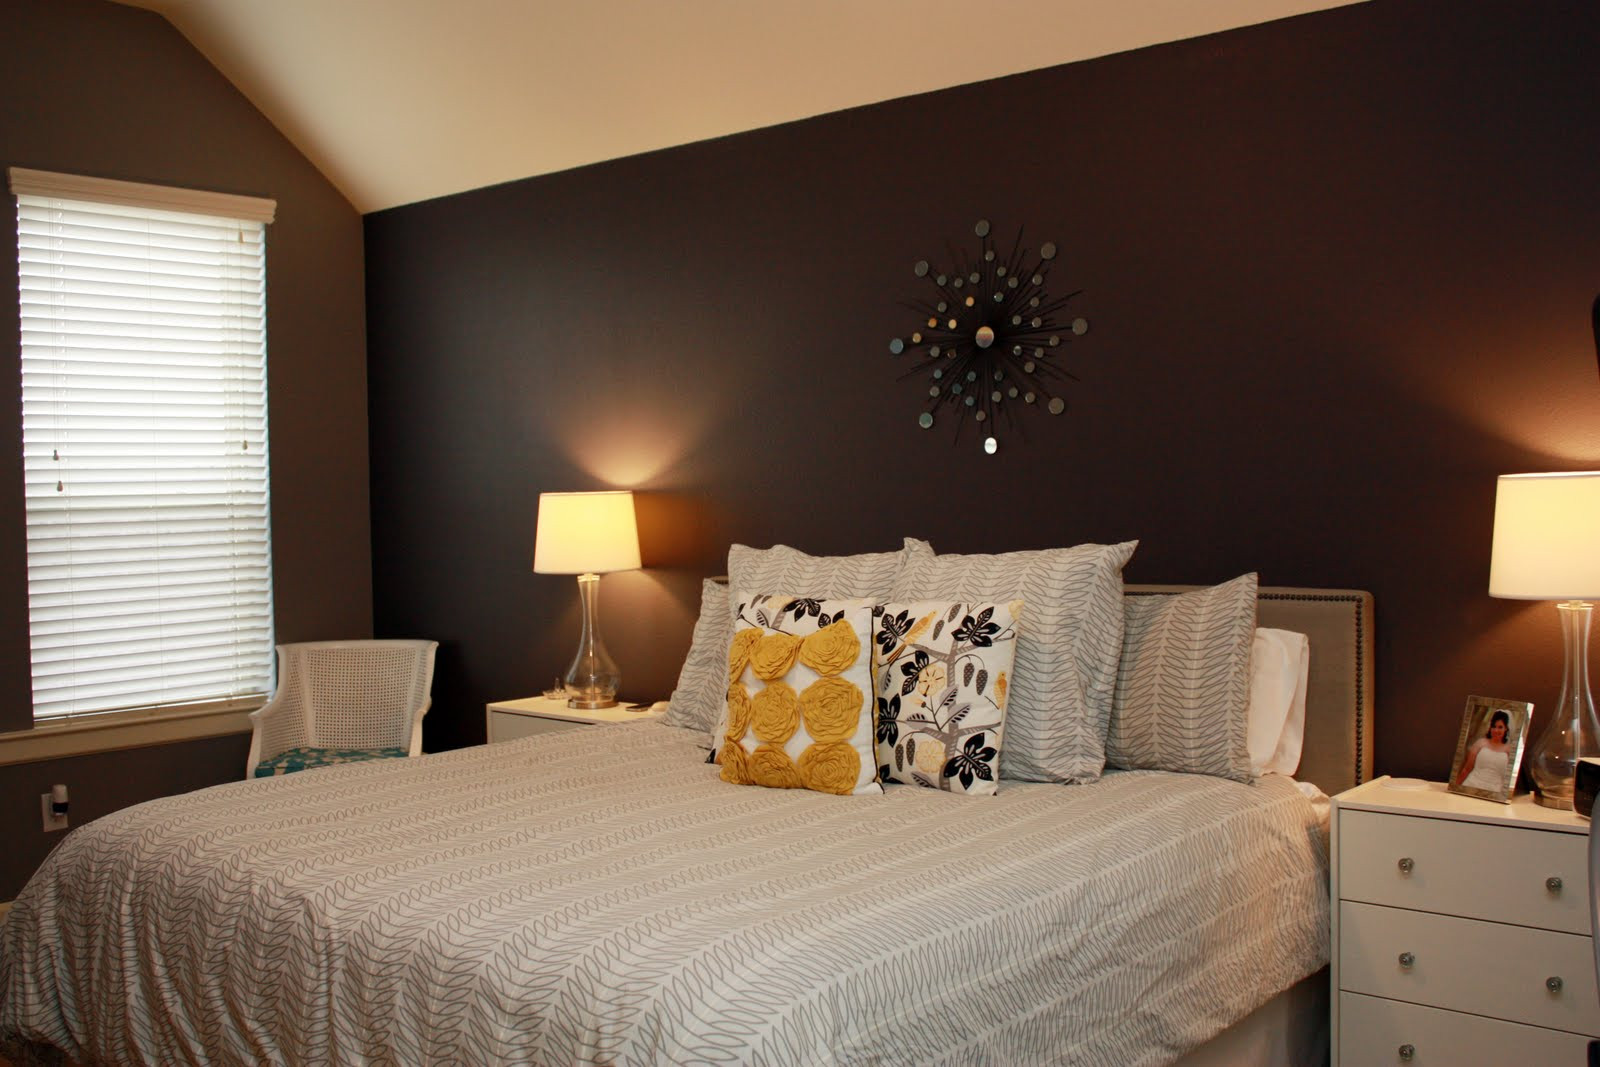 Master Bedroom Wallpaper Accent Wall
 pic new posts Wallpaper Accent Wall Master Bedroom